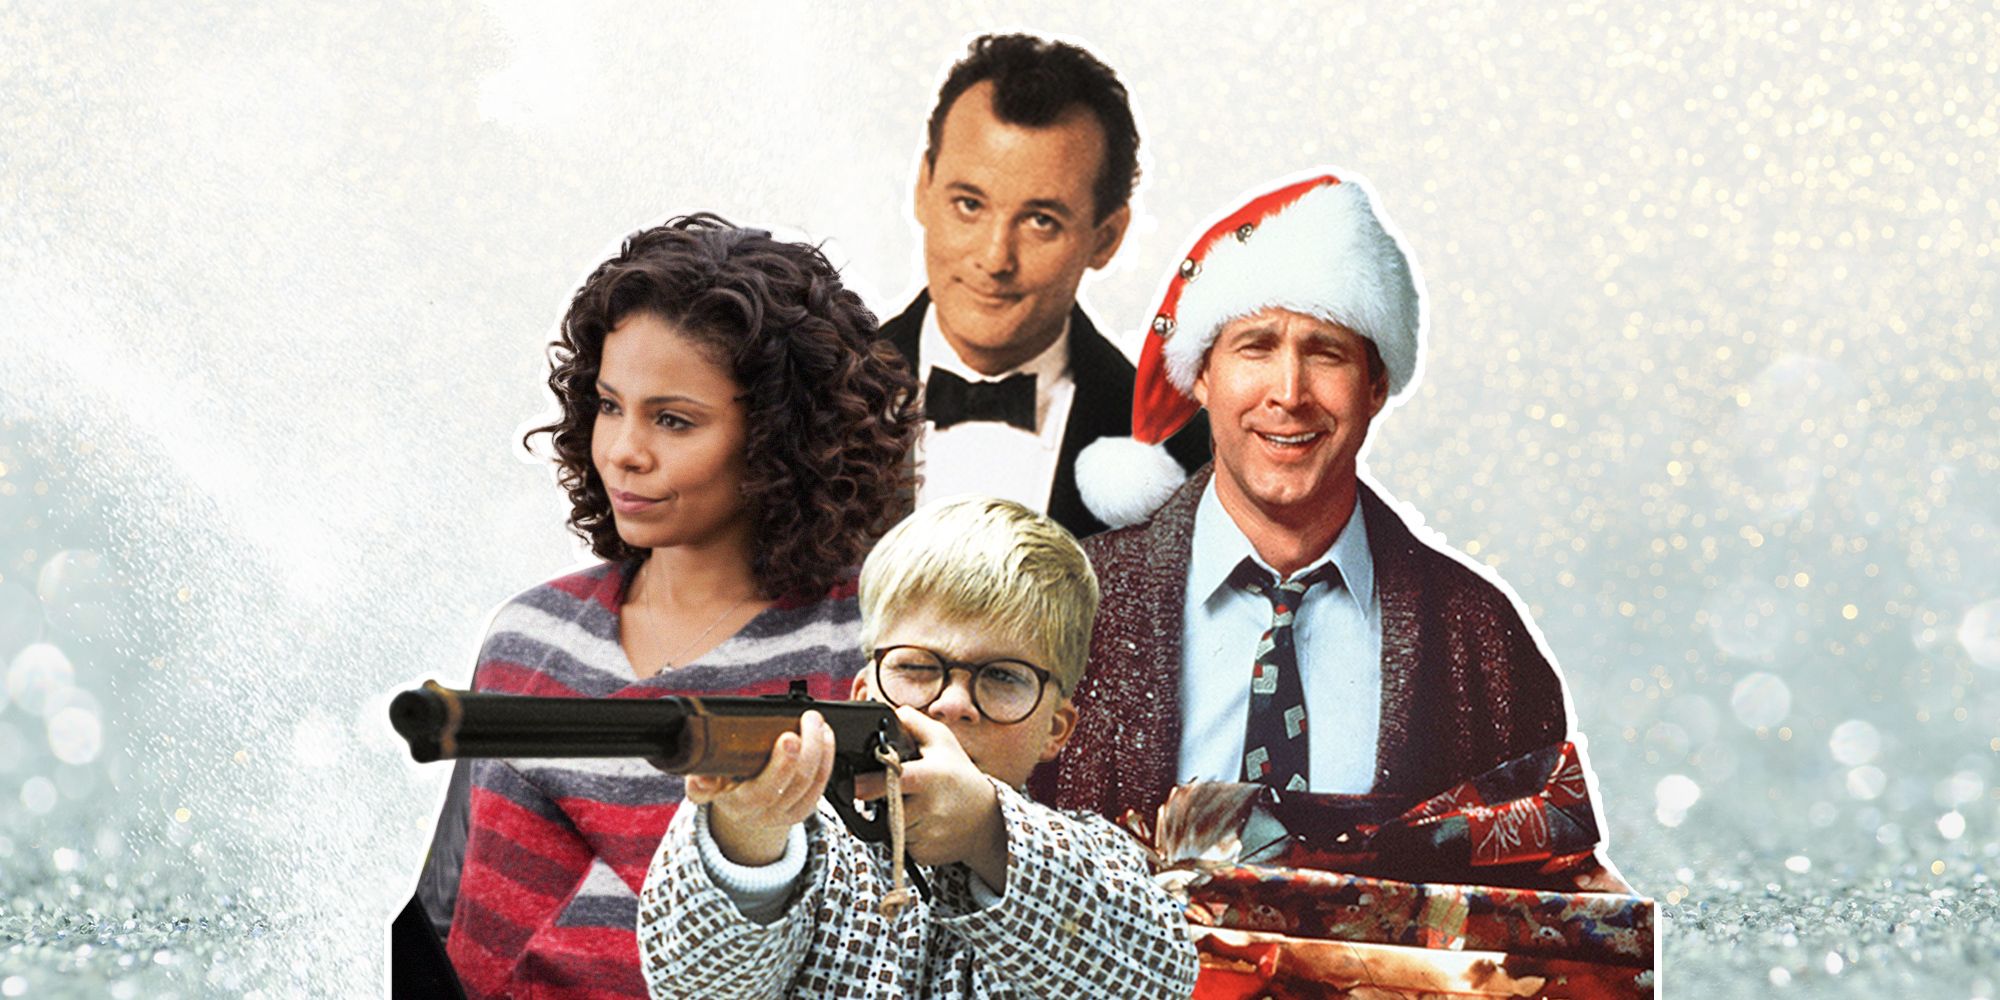 71 Best Christmas Movies of All Time - Best Christmas Films Ever Made